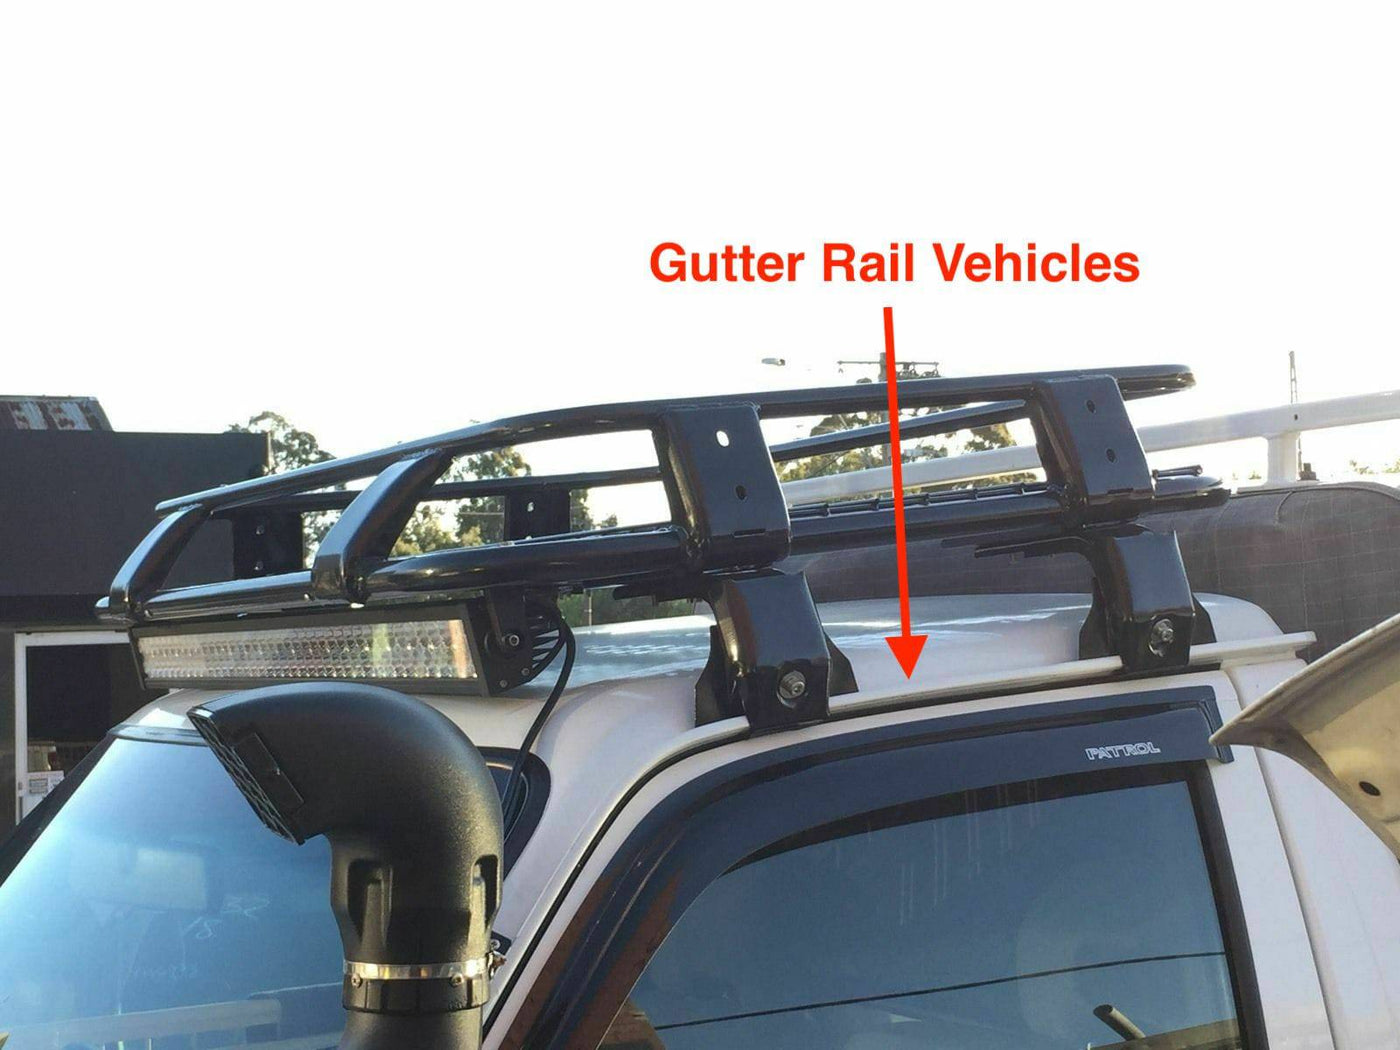 Full Steel Roof Cage suits Gutter Rail Vehicles Single Cabs Only